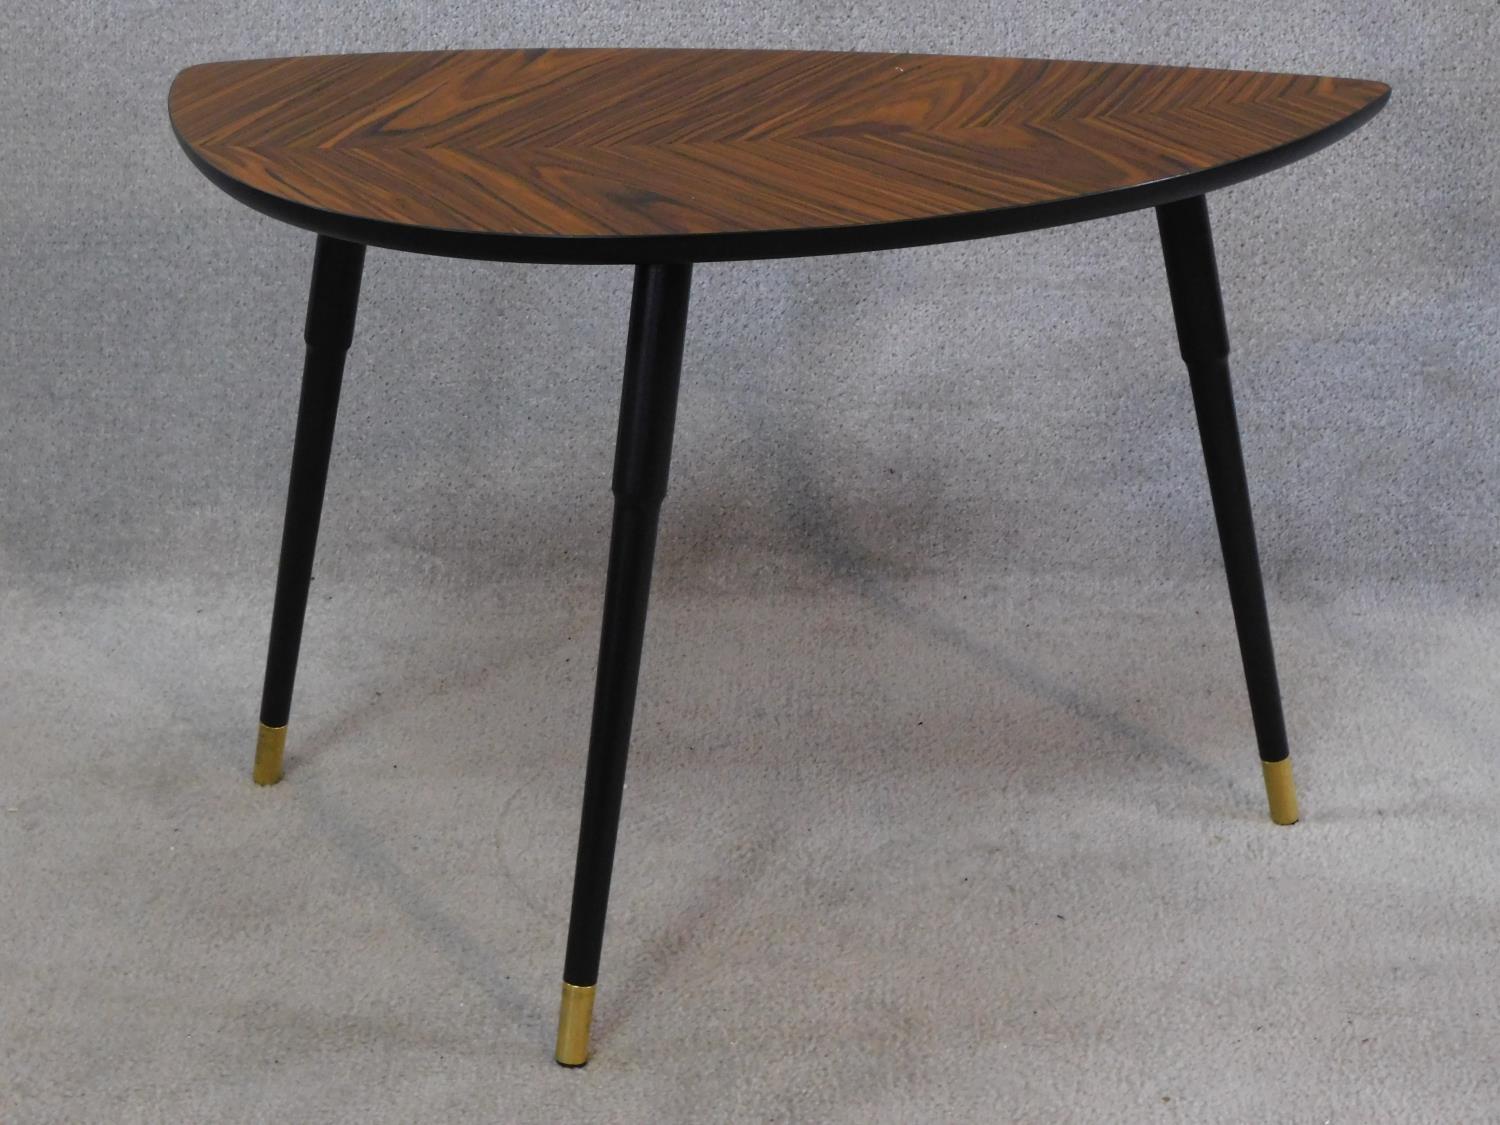 Three vintage style occasional tables with shaped faux zebra wood veneered tops on triple dansette - Image 3 of 4